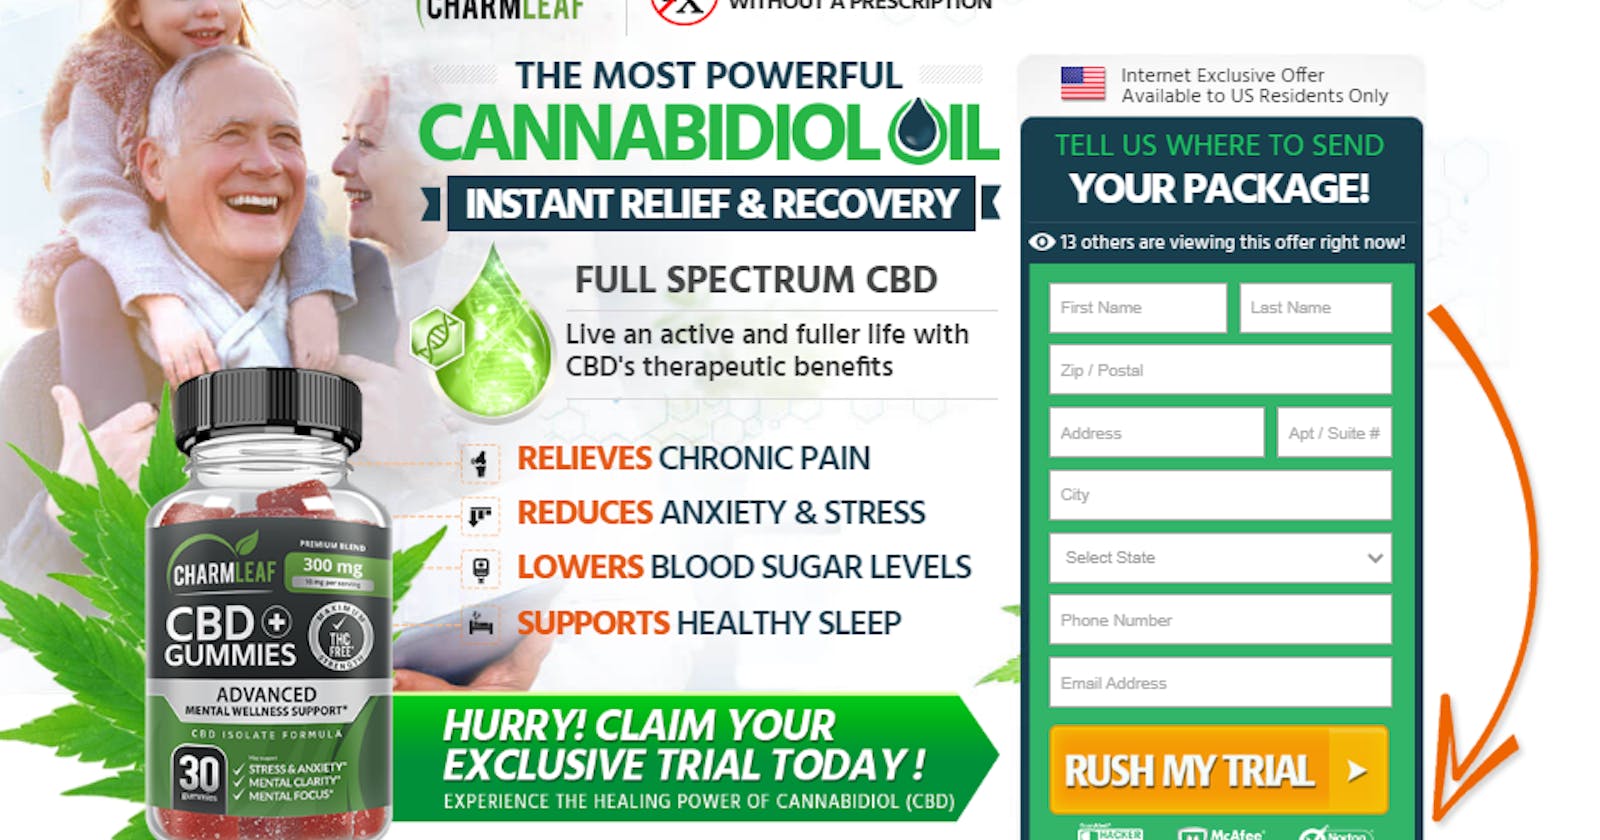 Charm Leaf CBD Gummies – [TOP REVIEWS] “PROS OR CONS” HYPE & HEALTH BALANCE (TRUSTED OR FRAUD) PRICE & REAL CUSTOMER REVIEWS 2023